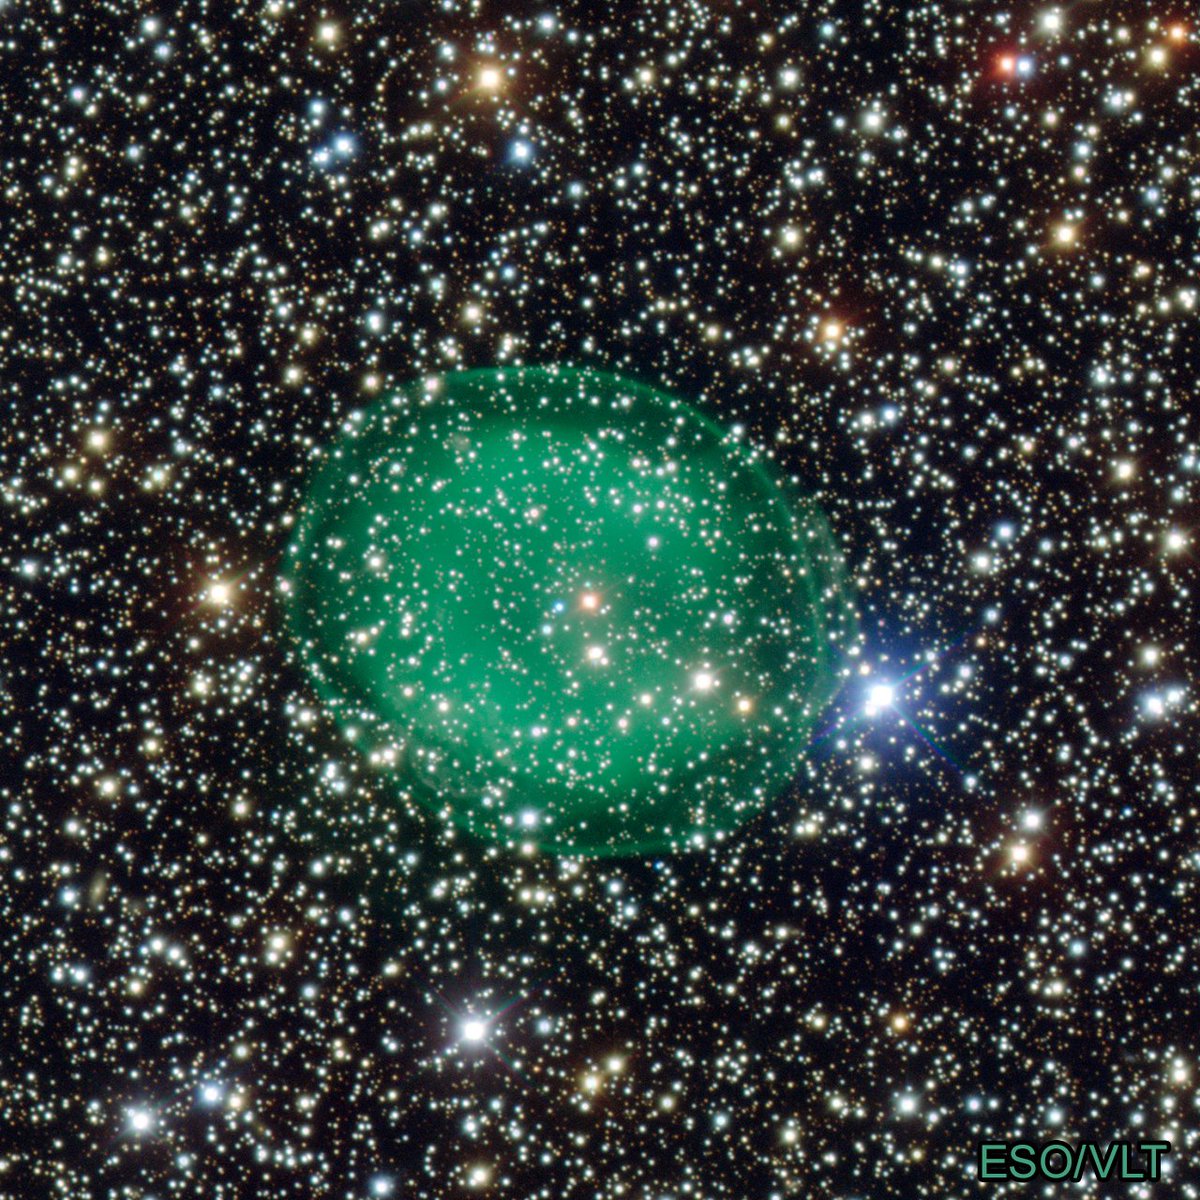 Today Chandra is studying a supernova in Scutum. Nearby in the sky is IC 1295, a planetary nebula located about 4,000 light-years from Earth. Different chemical elements glow with different colors. The emerald green glow of IC 1295 is due to the presence of ionized oxygen.